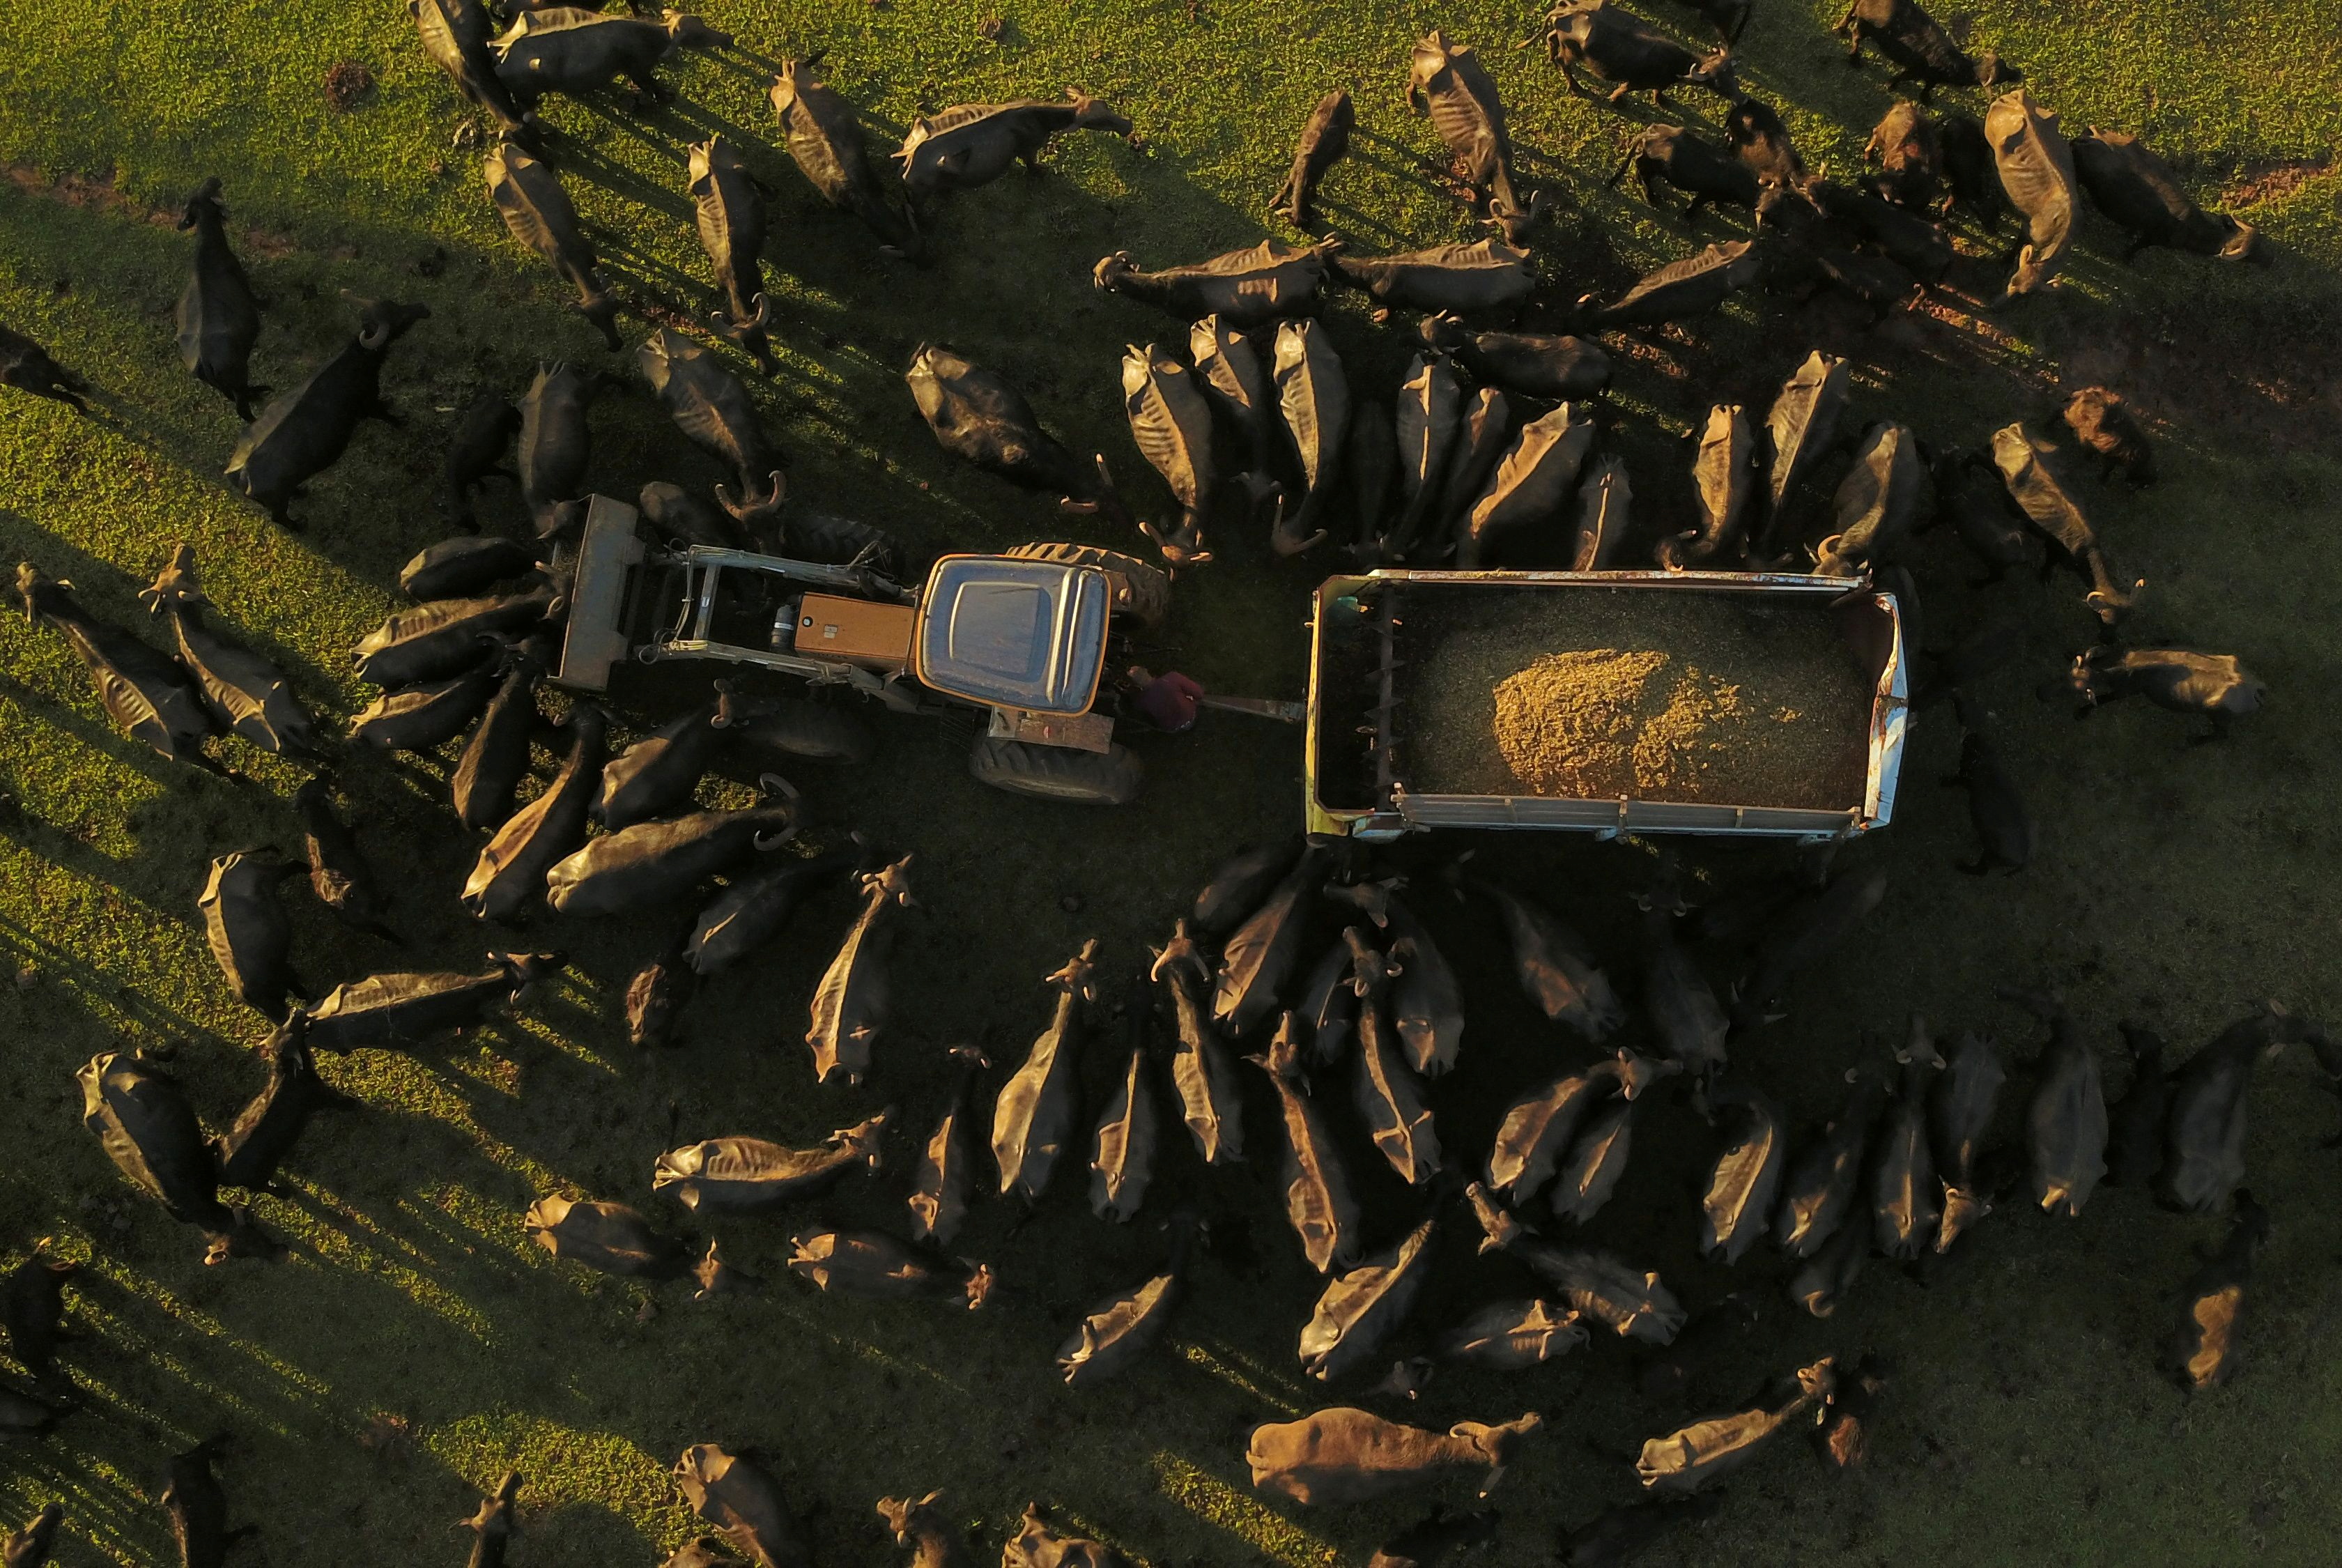 Buffaloes eat food given by volunteers at a farm where Environmental Police found hundreds of malnourished and mistreated buffaloes in Brotas, Sao Paulo state, Brazil December 1, 2021. REUTERS/Amanda Perobelli     